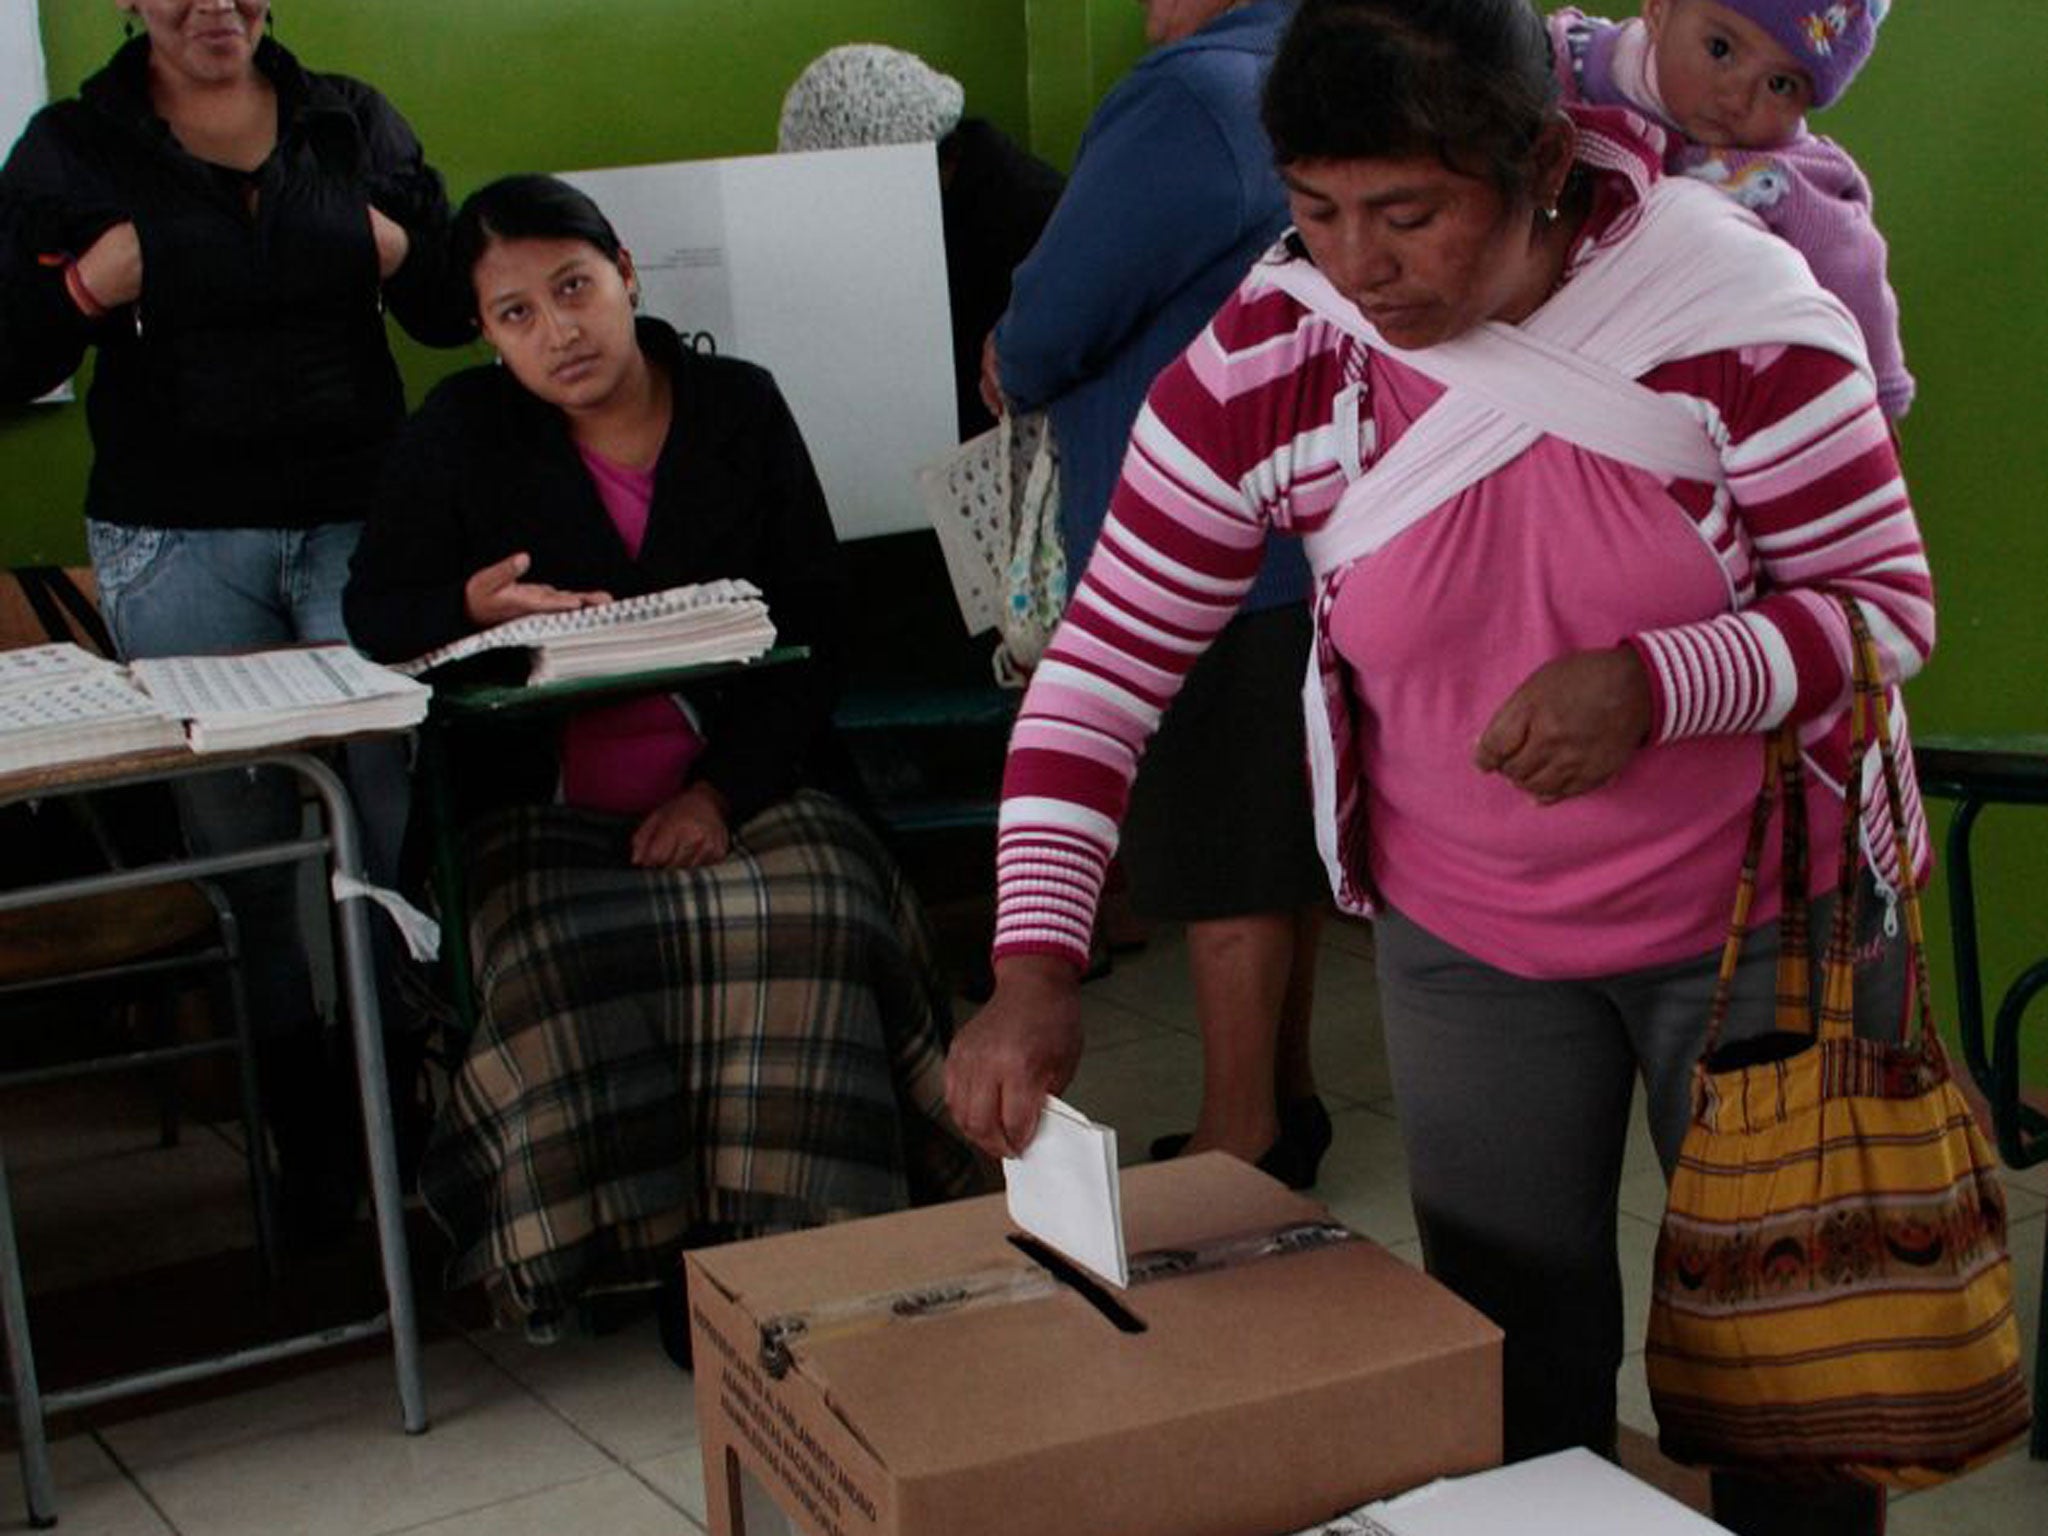 Citizens in polling stations in Quito